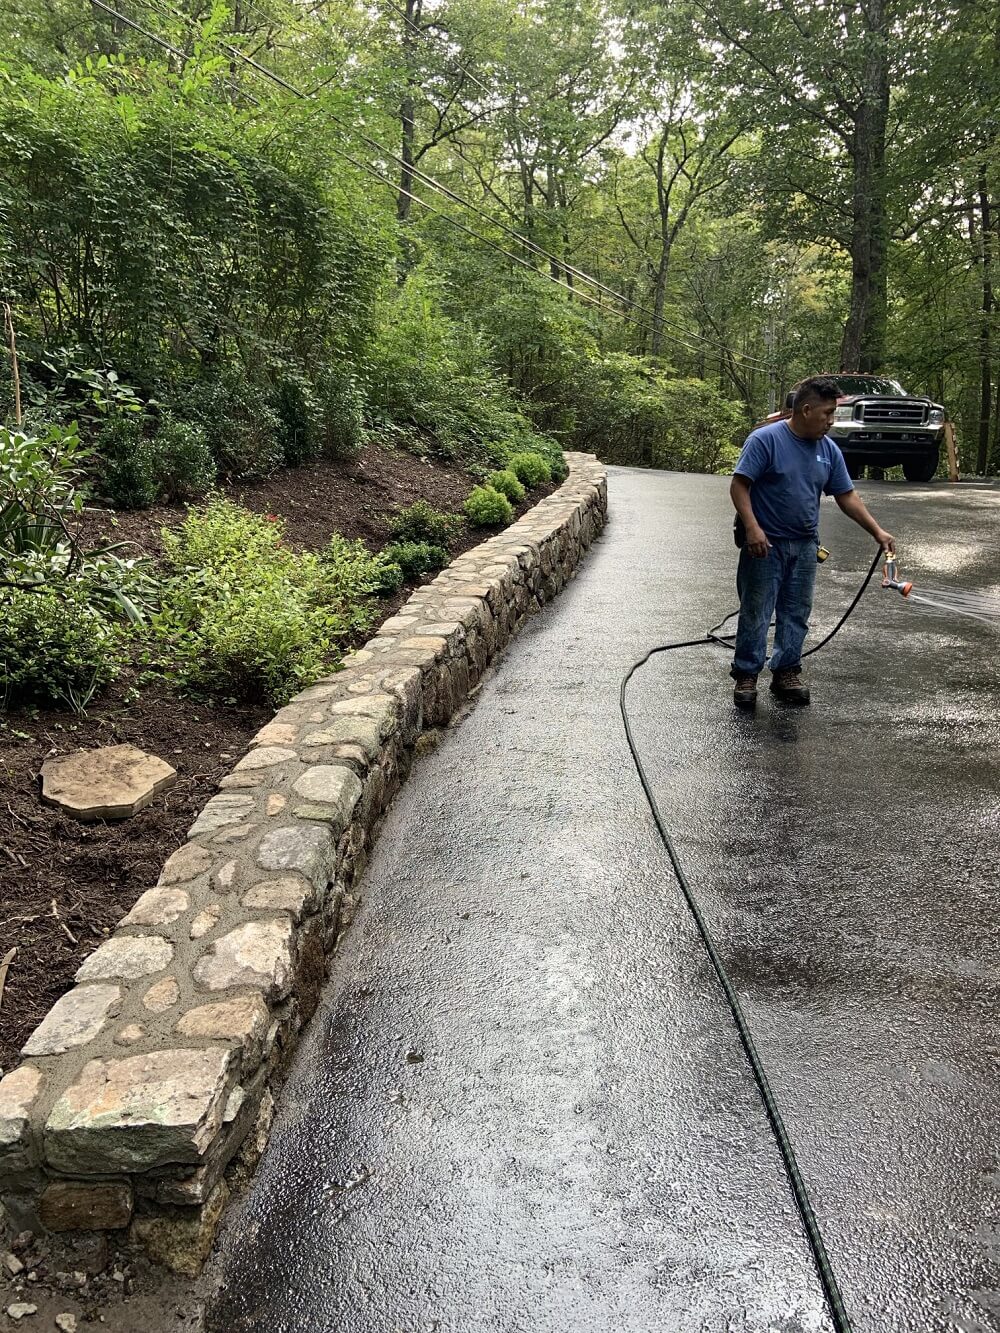 A man performing landscape maintenance by cleaning a driveway with a hose.